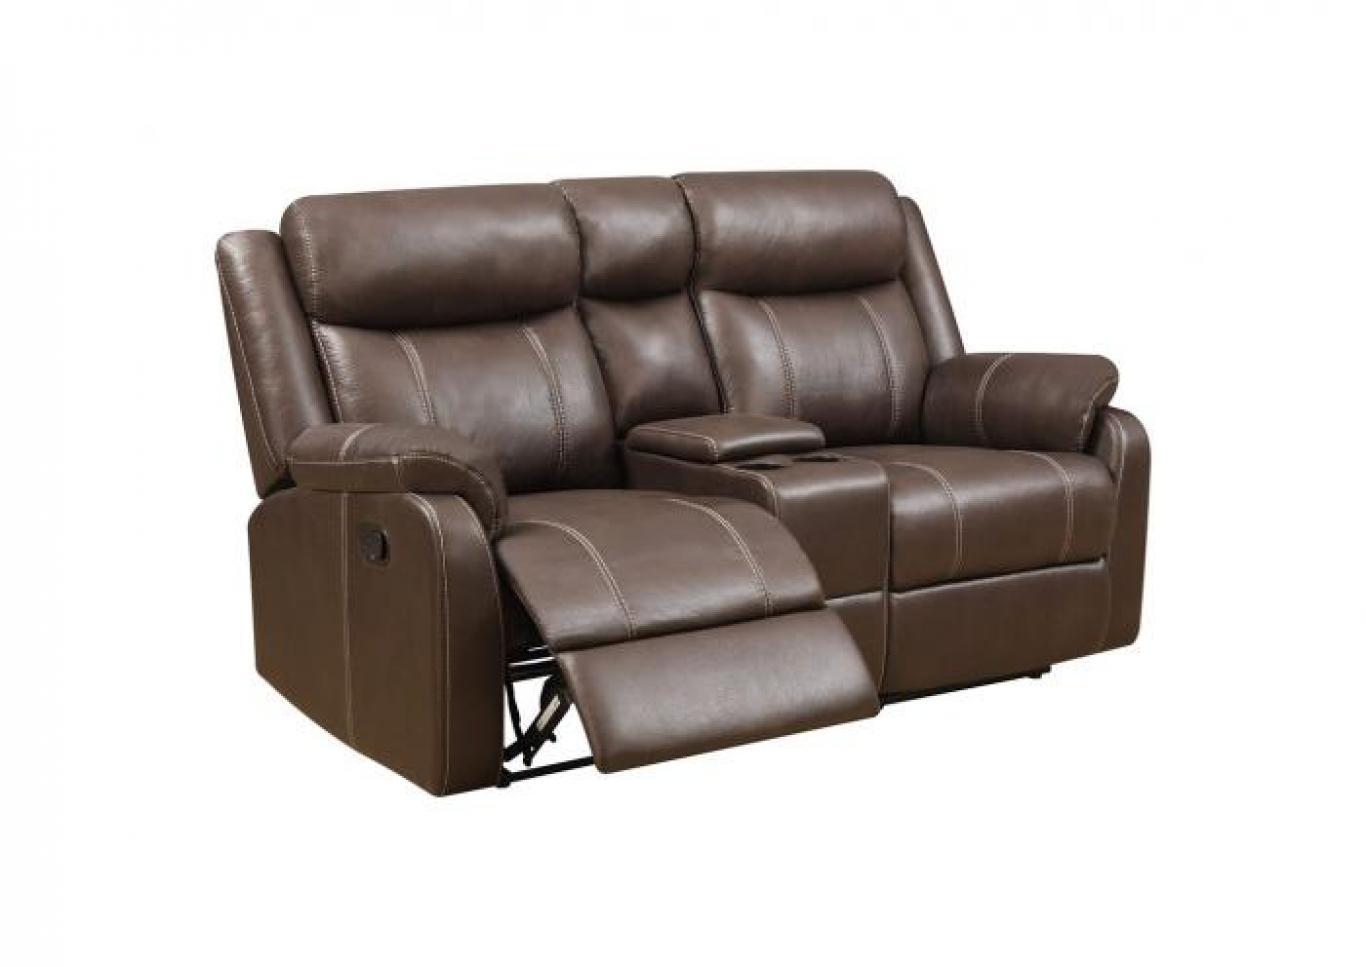 Domino Dual Reclining Loveseat with Console - Brown,Instore